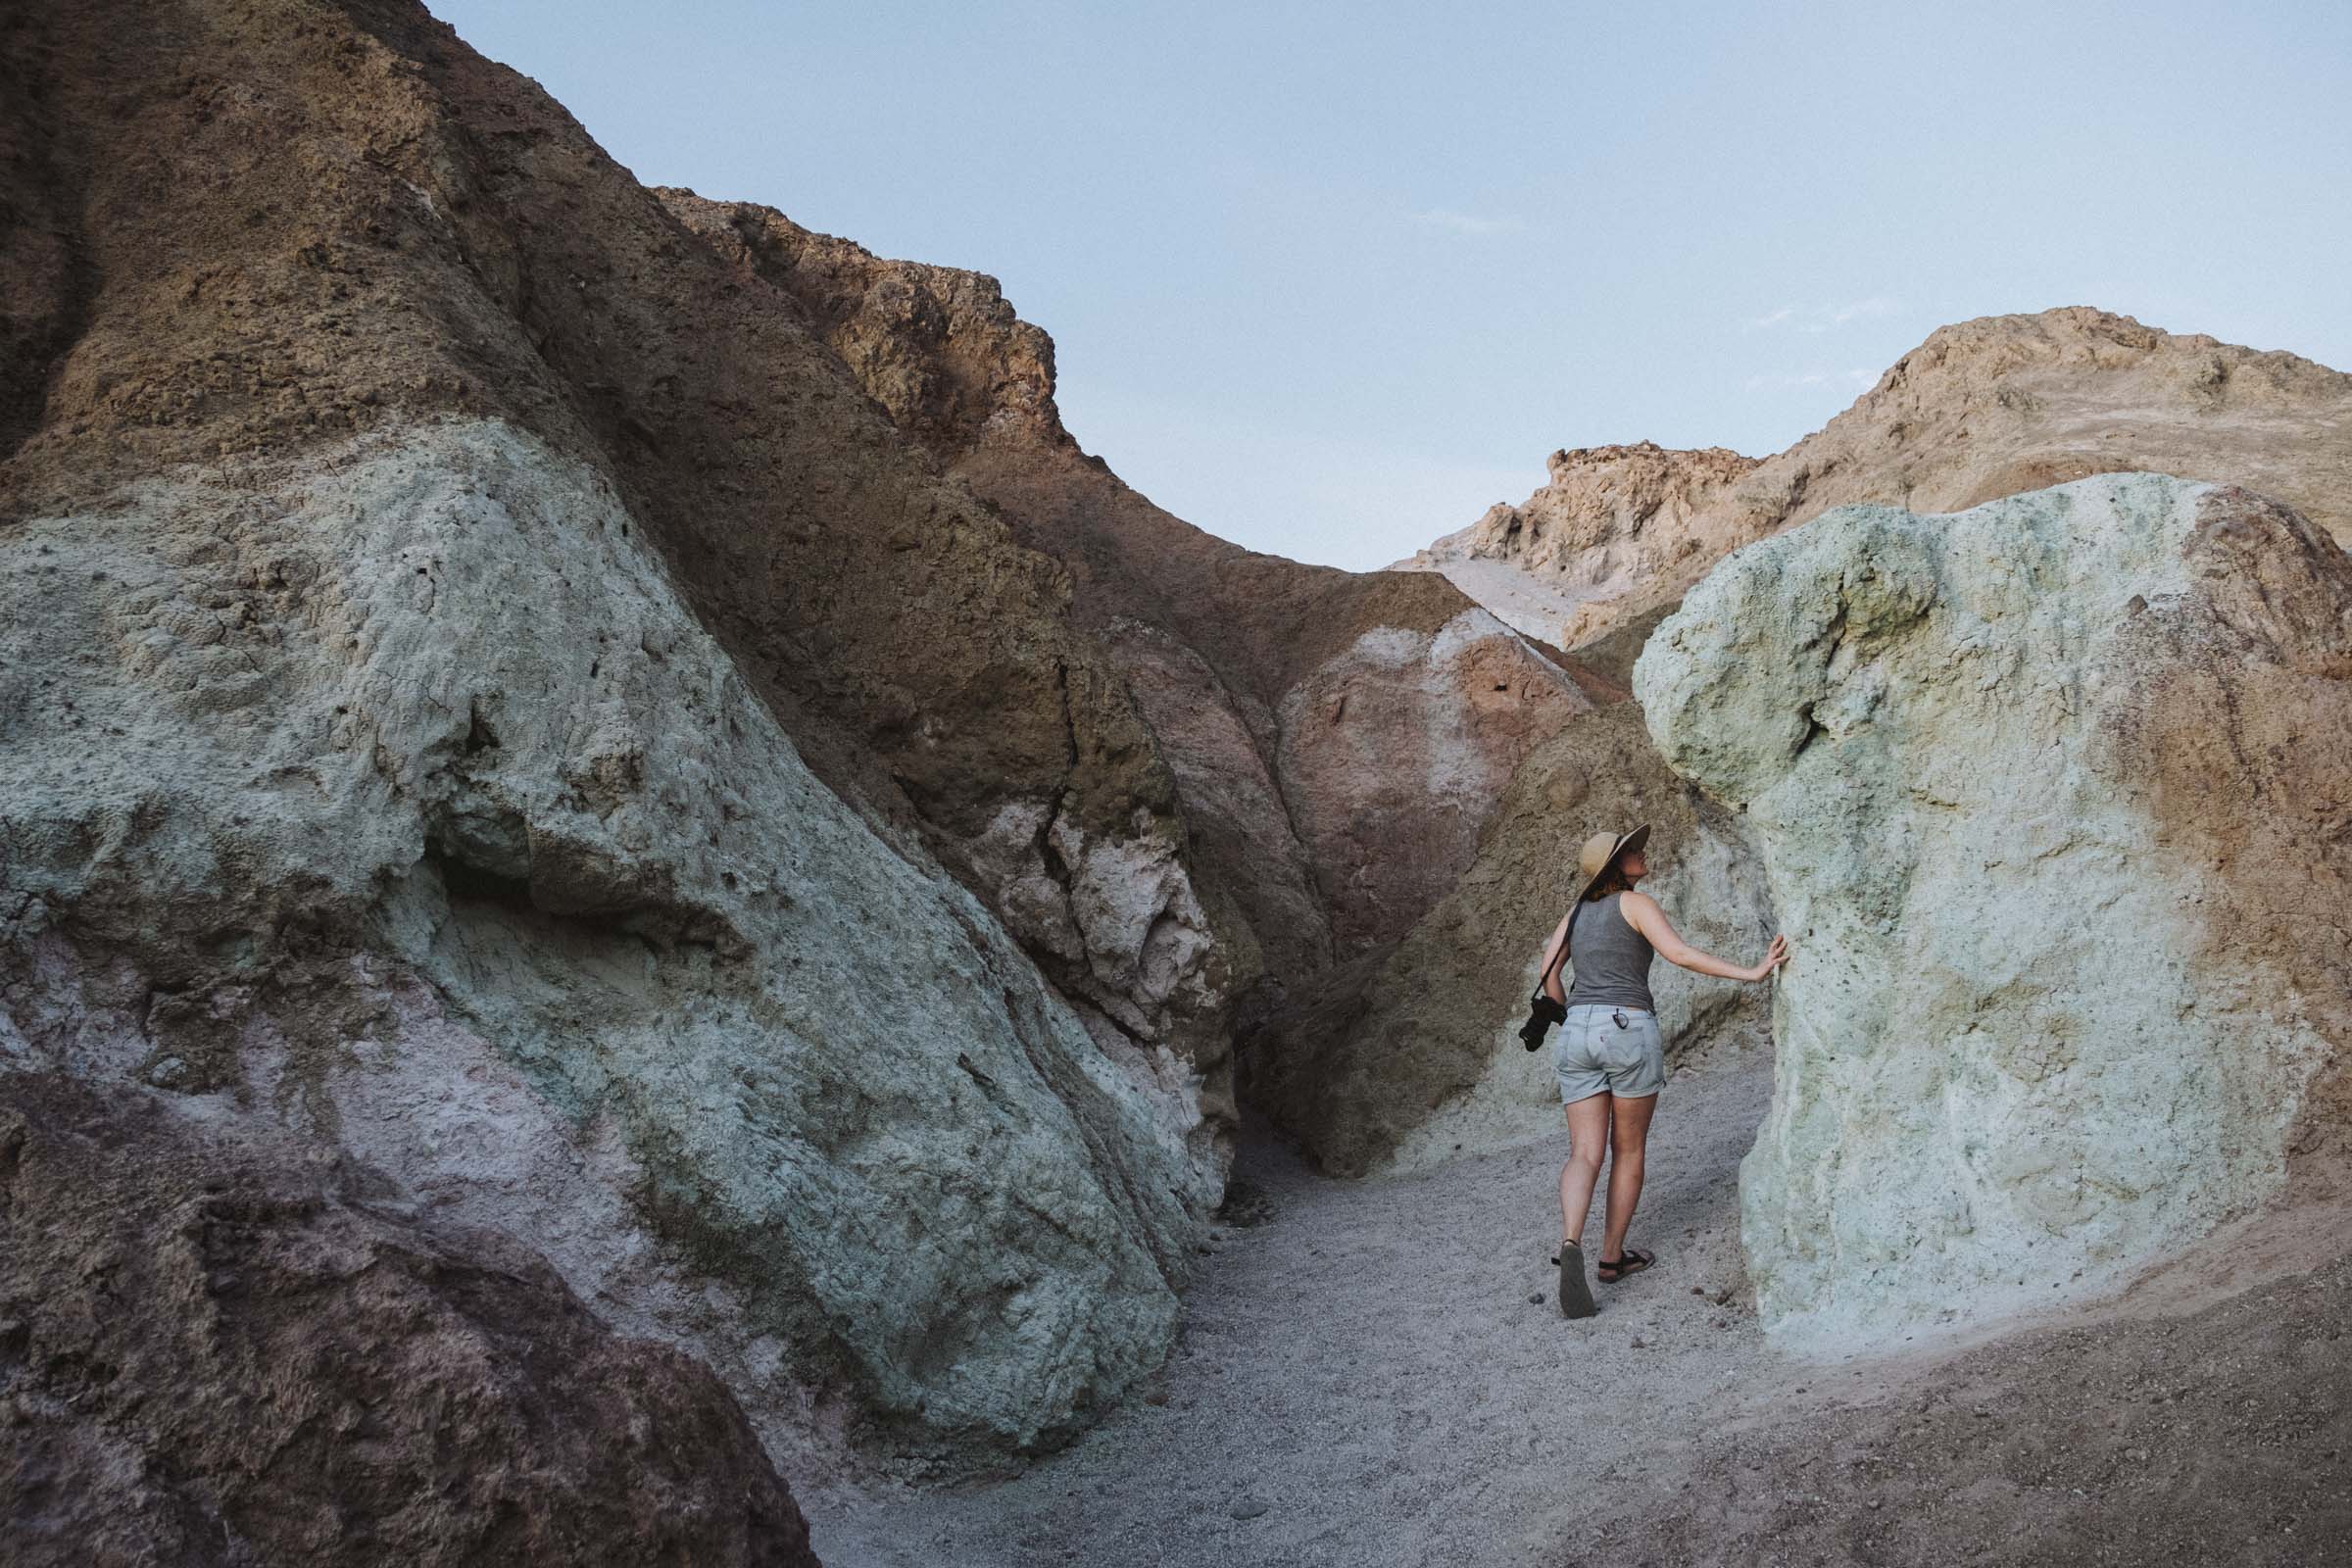 Scrambling up the Artist's Palette in Death Valley